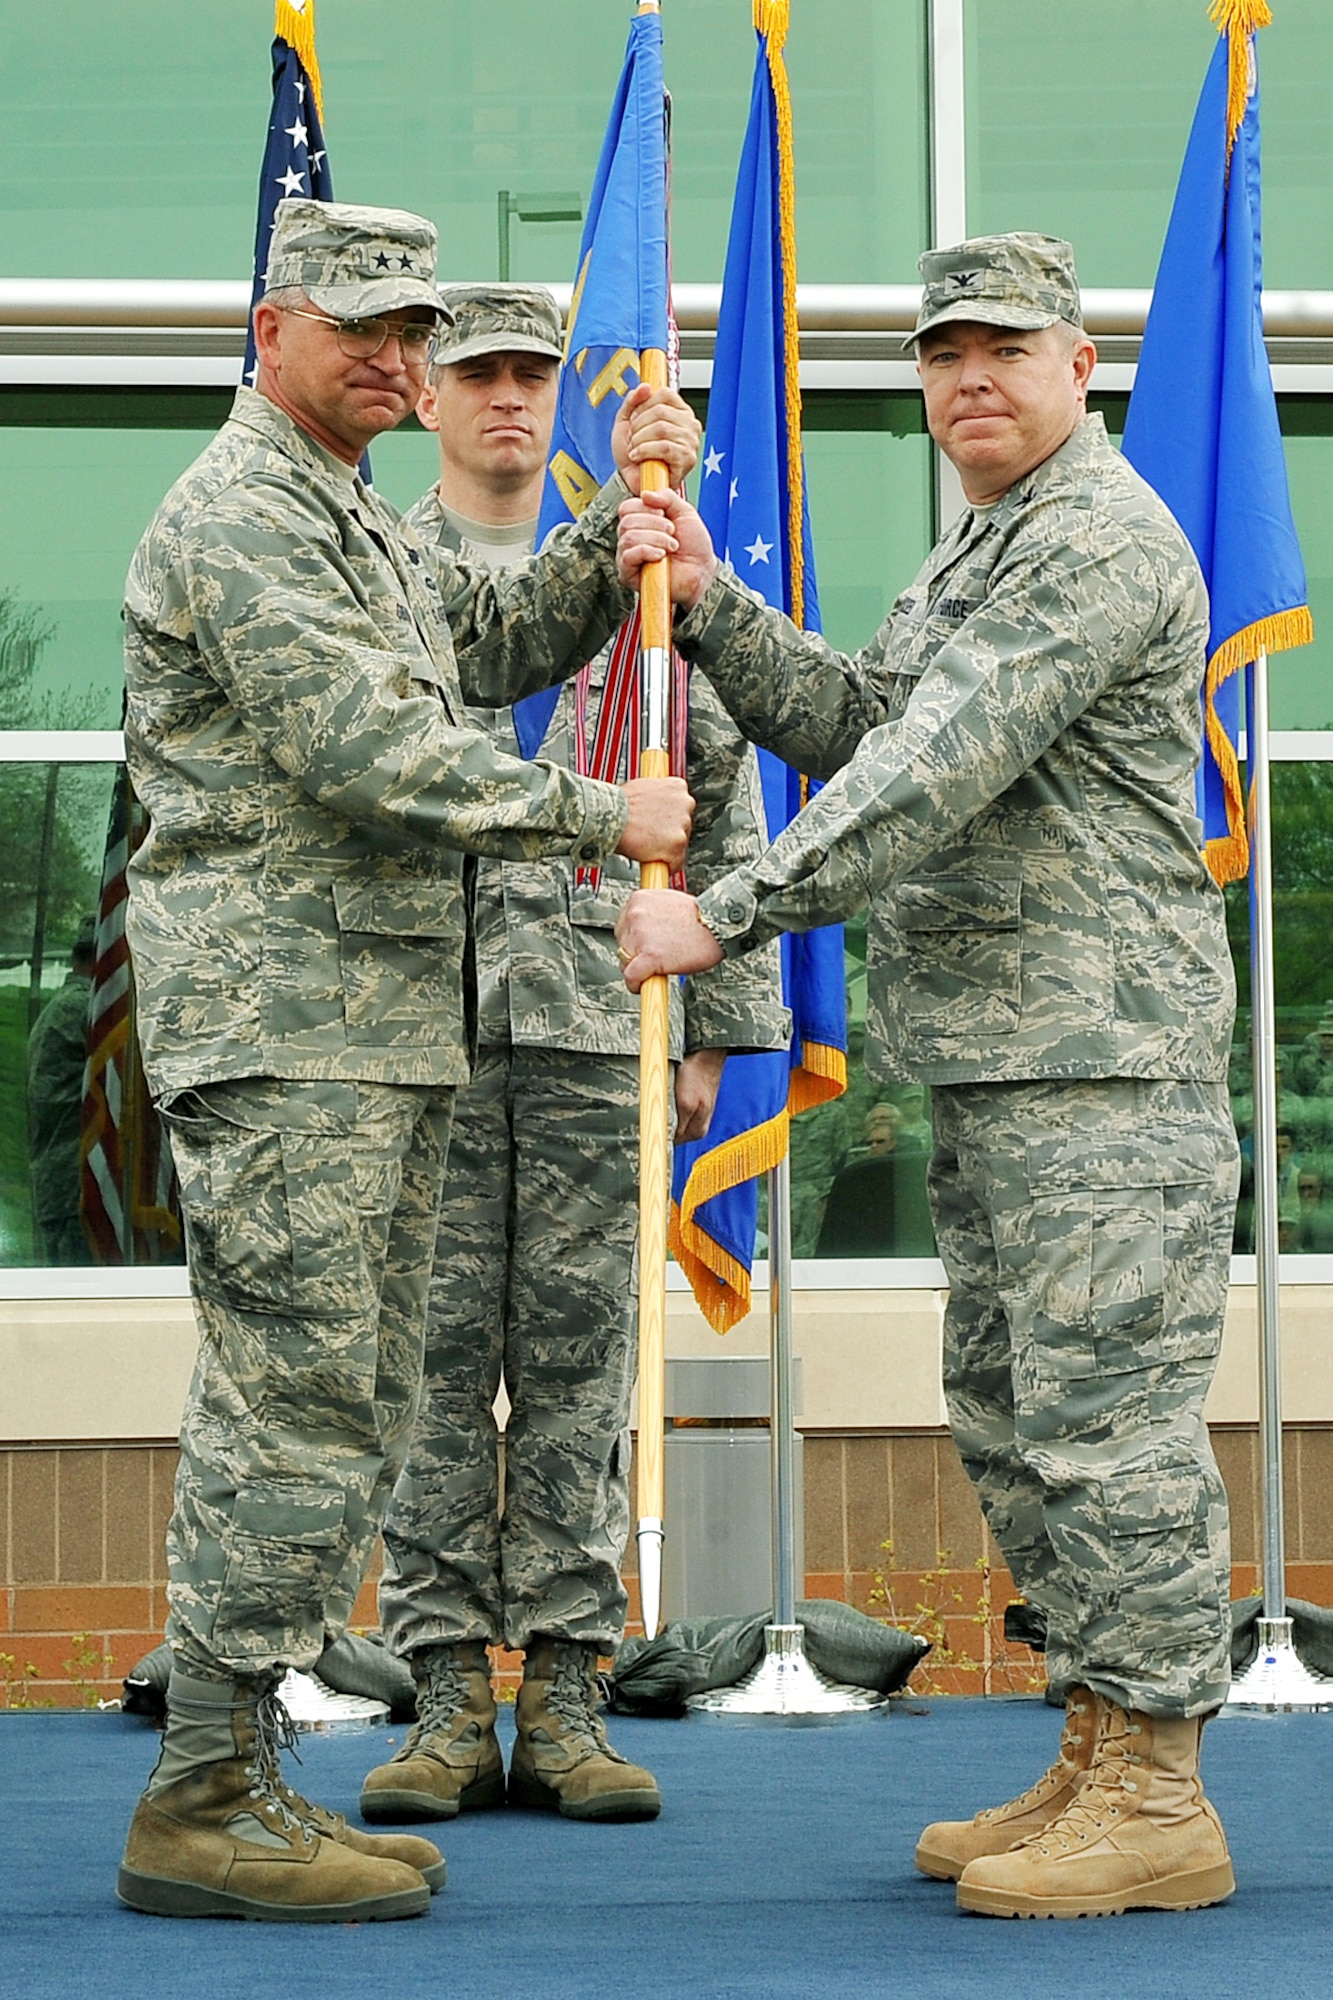 OFFUTT AIR FORCE BASE, Neb. -- Maj. Gen. Marke Gibson, Air Force director of operations and deputy chief of staff for operations, plans and requirements, presents Col. Robert L. Russell, Jr., incoming AFWA commander, with the AFWA guideon, during a change of command ceremony here April 20 in front of the Lt. Gen. Thomas S. Moorman building. The agency is comprised of more than 1,400 active-duty members, civil service employees and contractors at 14 operating locations around the world which provide centralized weather products and services, including climatological and space weather support to all branches of the armed forces. U.S. Air Force photo by Charles Haymond